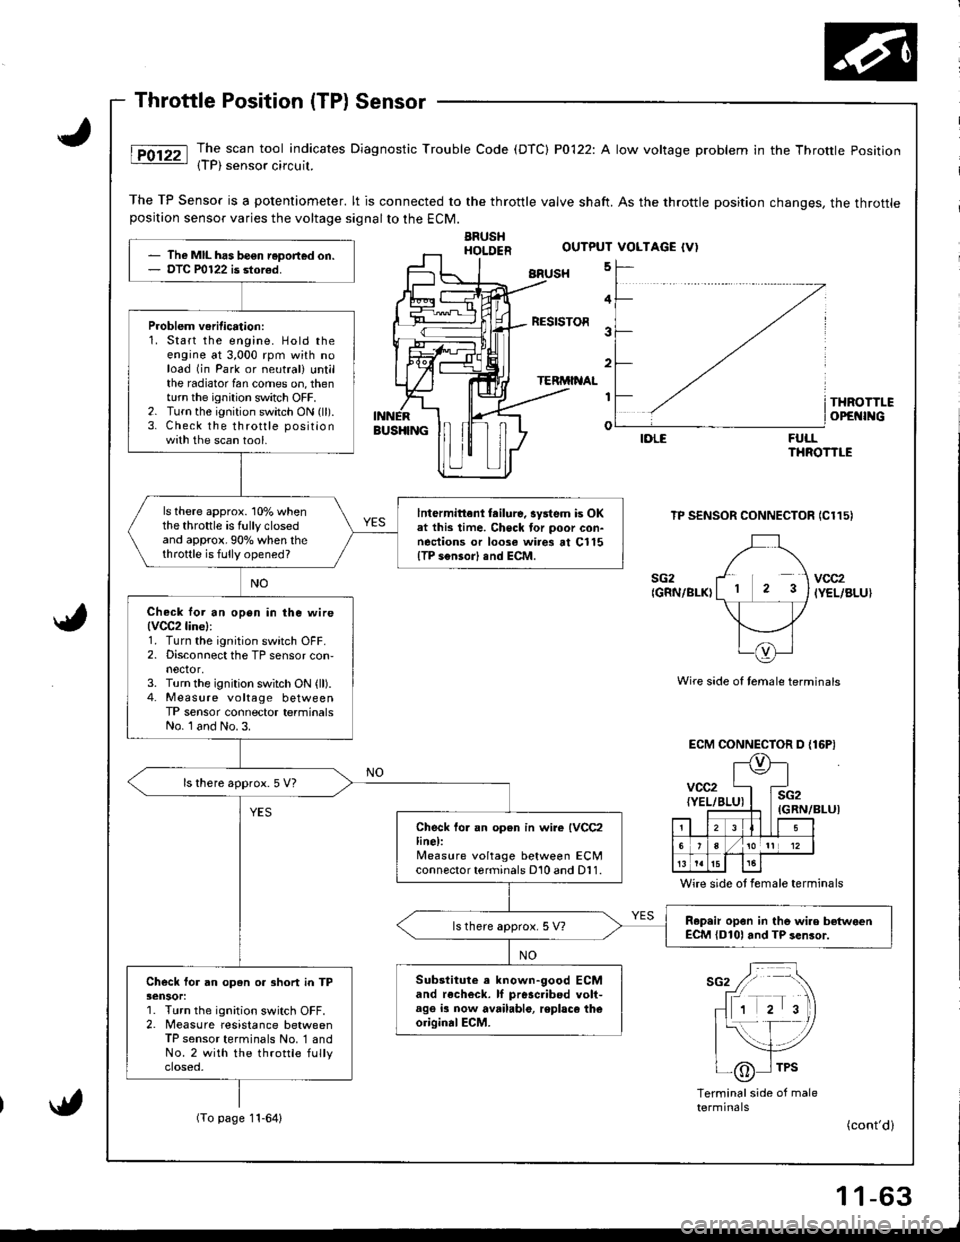 HONDA INTEGRA 1998 4.G Workshop Manual The scan tool indicates Diagnostic Trouble Code (DTC) P0122: A low voltage problem in the Throttle Position{TP) sensor circuil.
The TP Sensor is a potentiometer. lt is connected to the throttle valve 